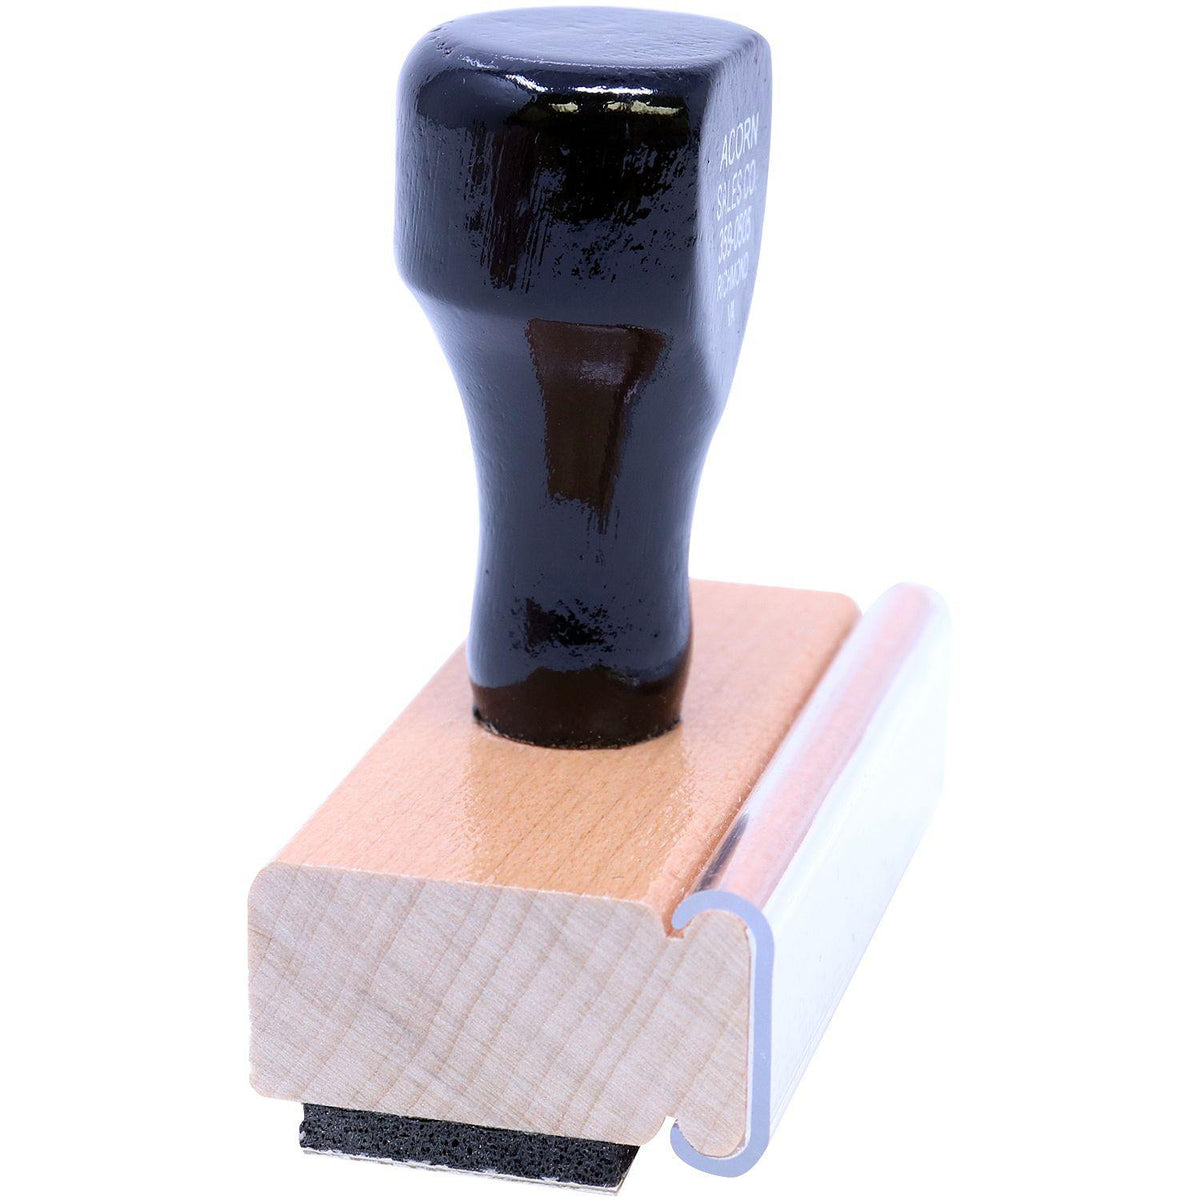 Side View of Large Good Job Rubber Stamp at an Angle